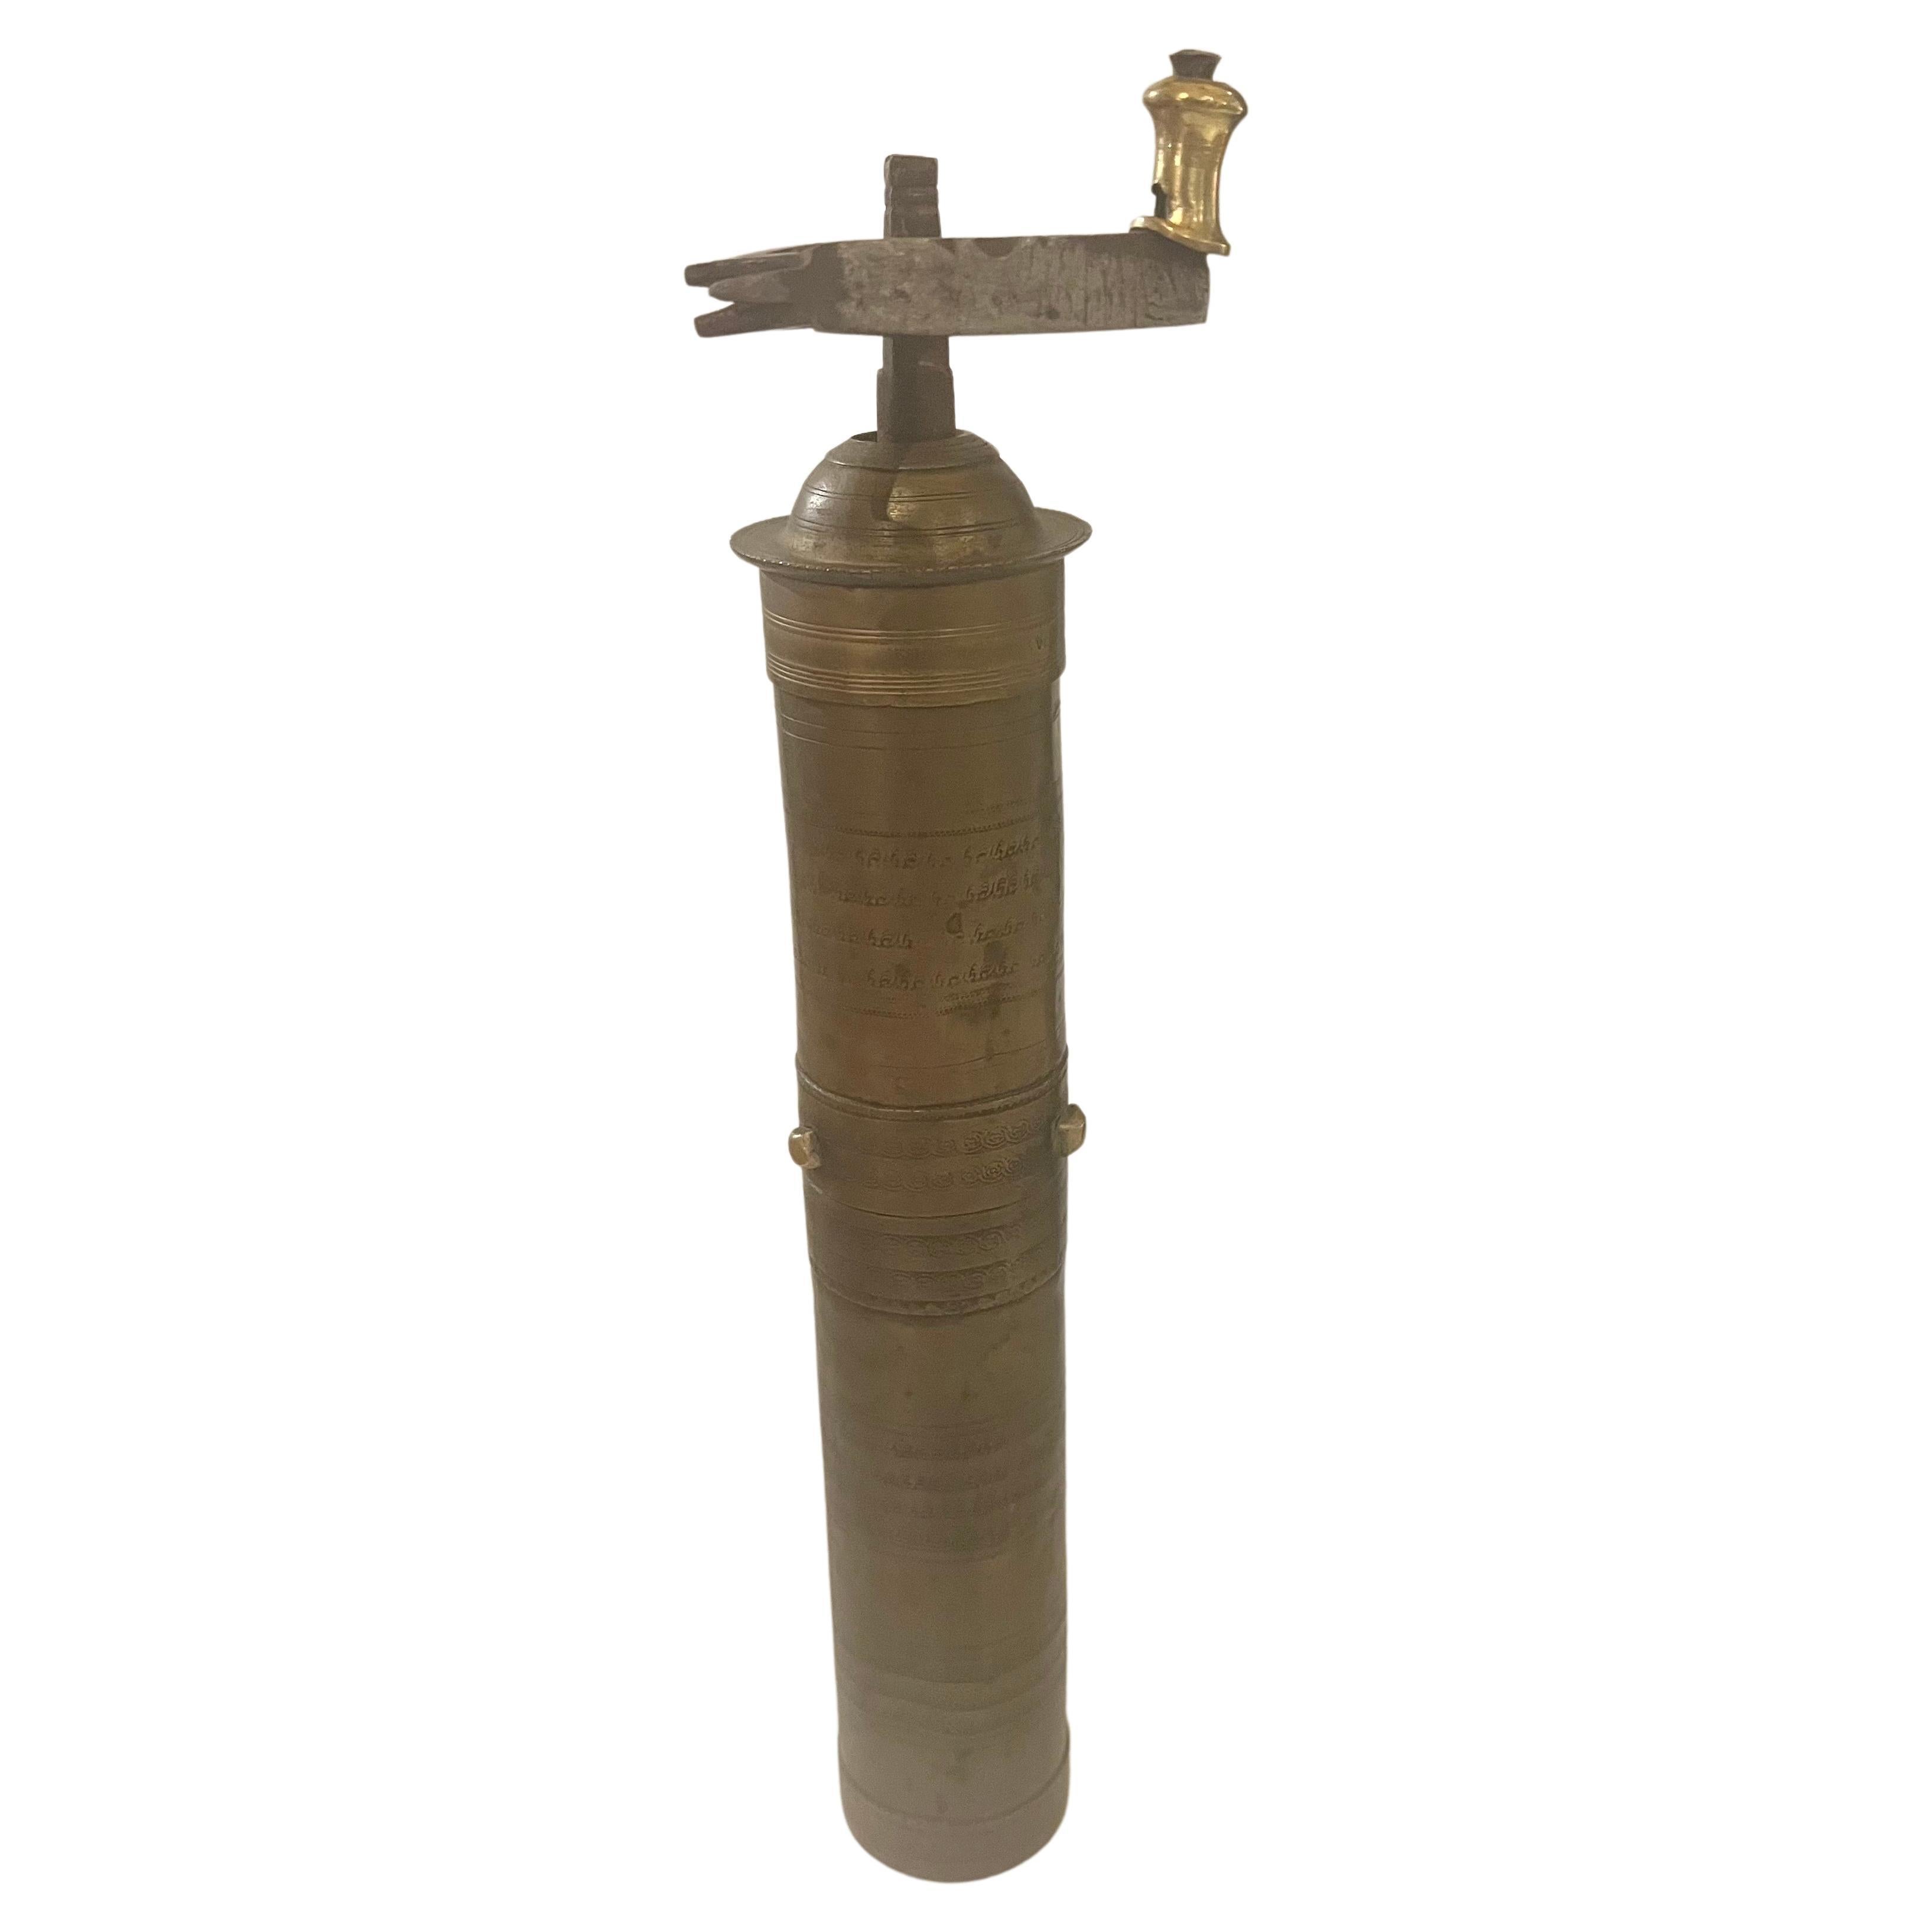 Beautiful antique rare pepper coffee spice grinder, hand made an incredible mechanical piece hand hammered one of a kind rare piece with some inscription that reads 4 CARANTI.